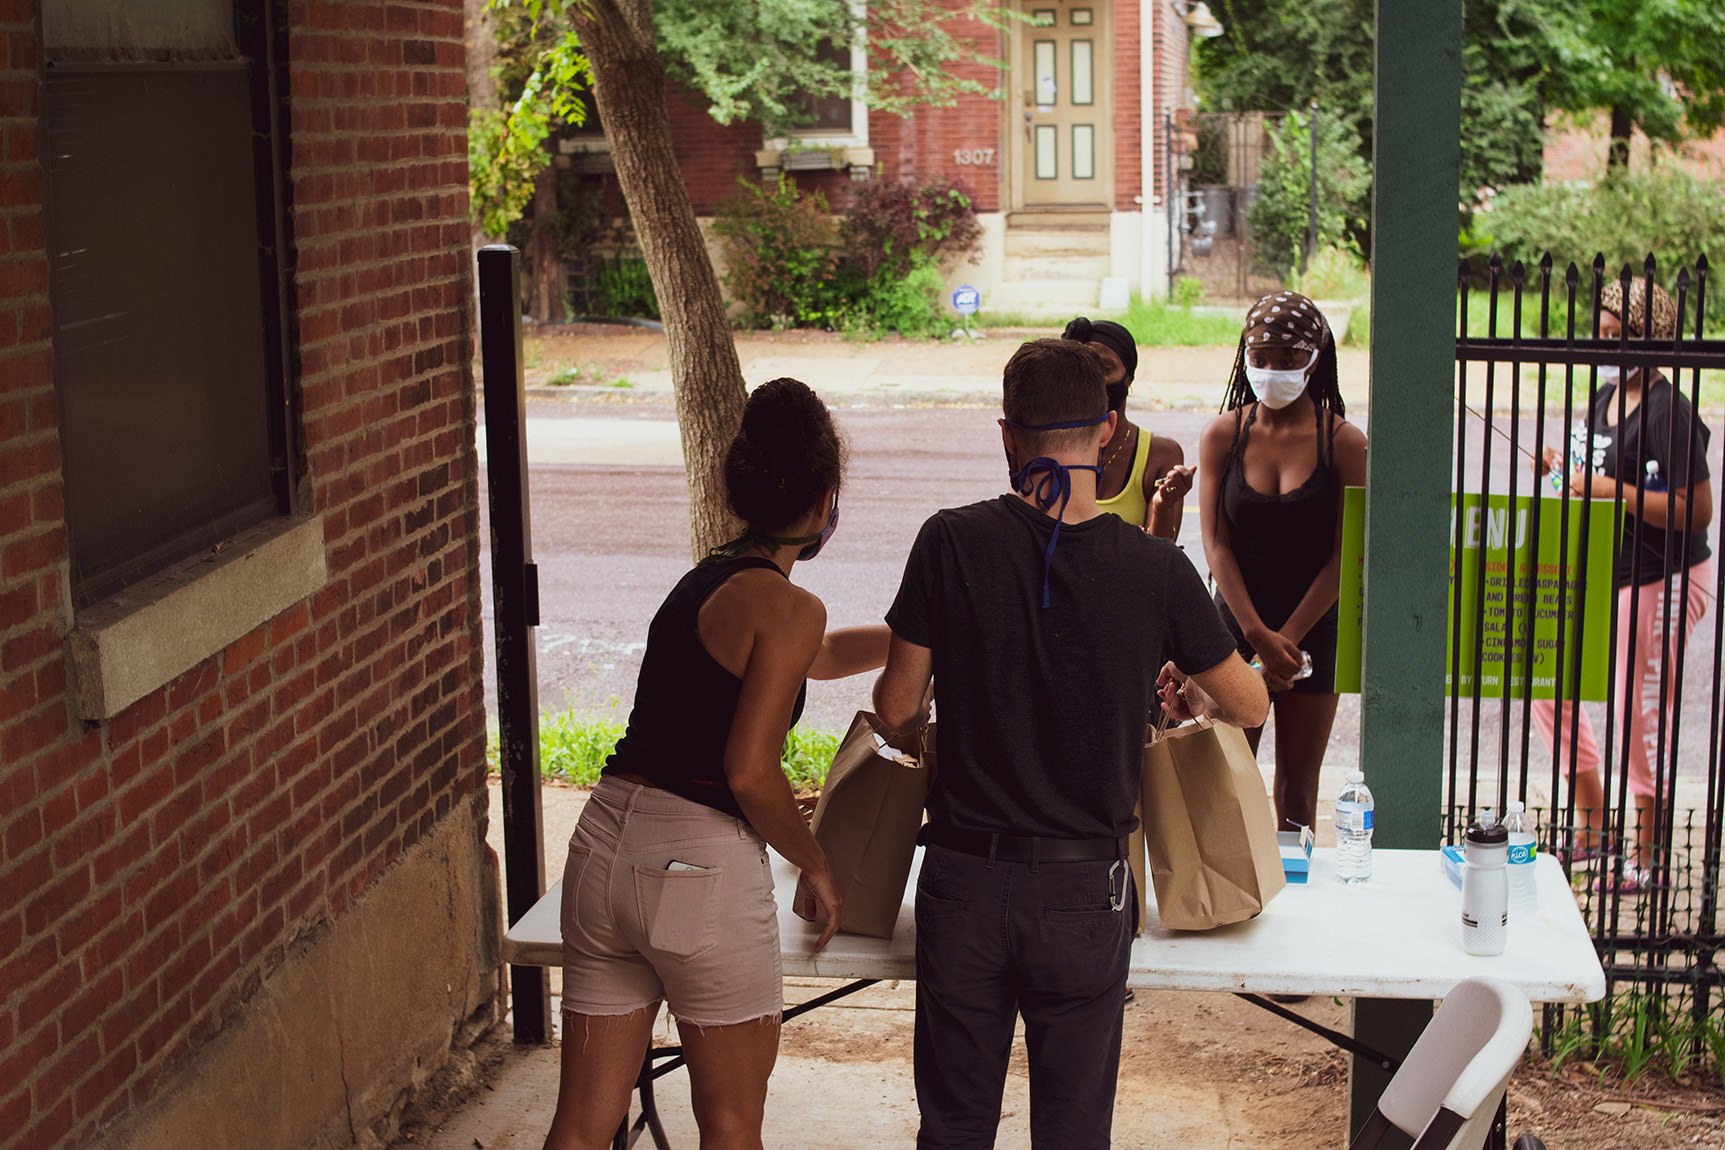 Volunteers distribute brown paper bags filled with food to community members at the Northside Workshop entrance.